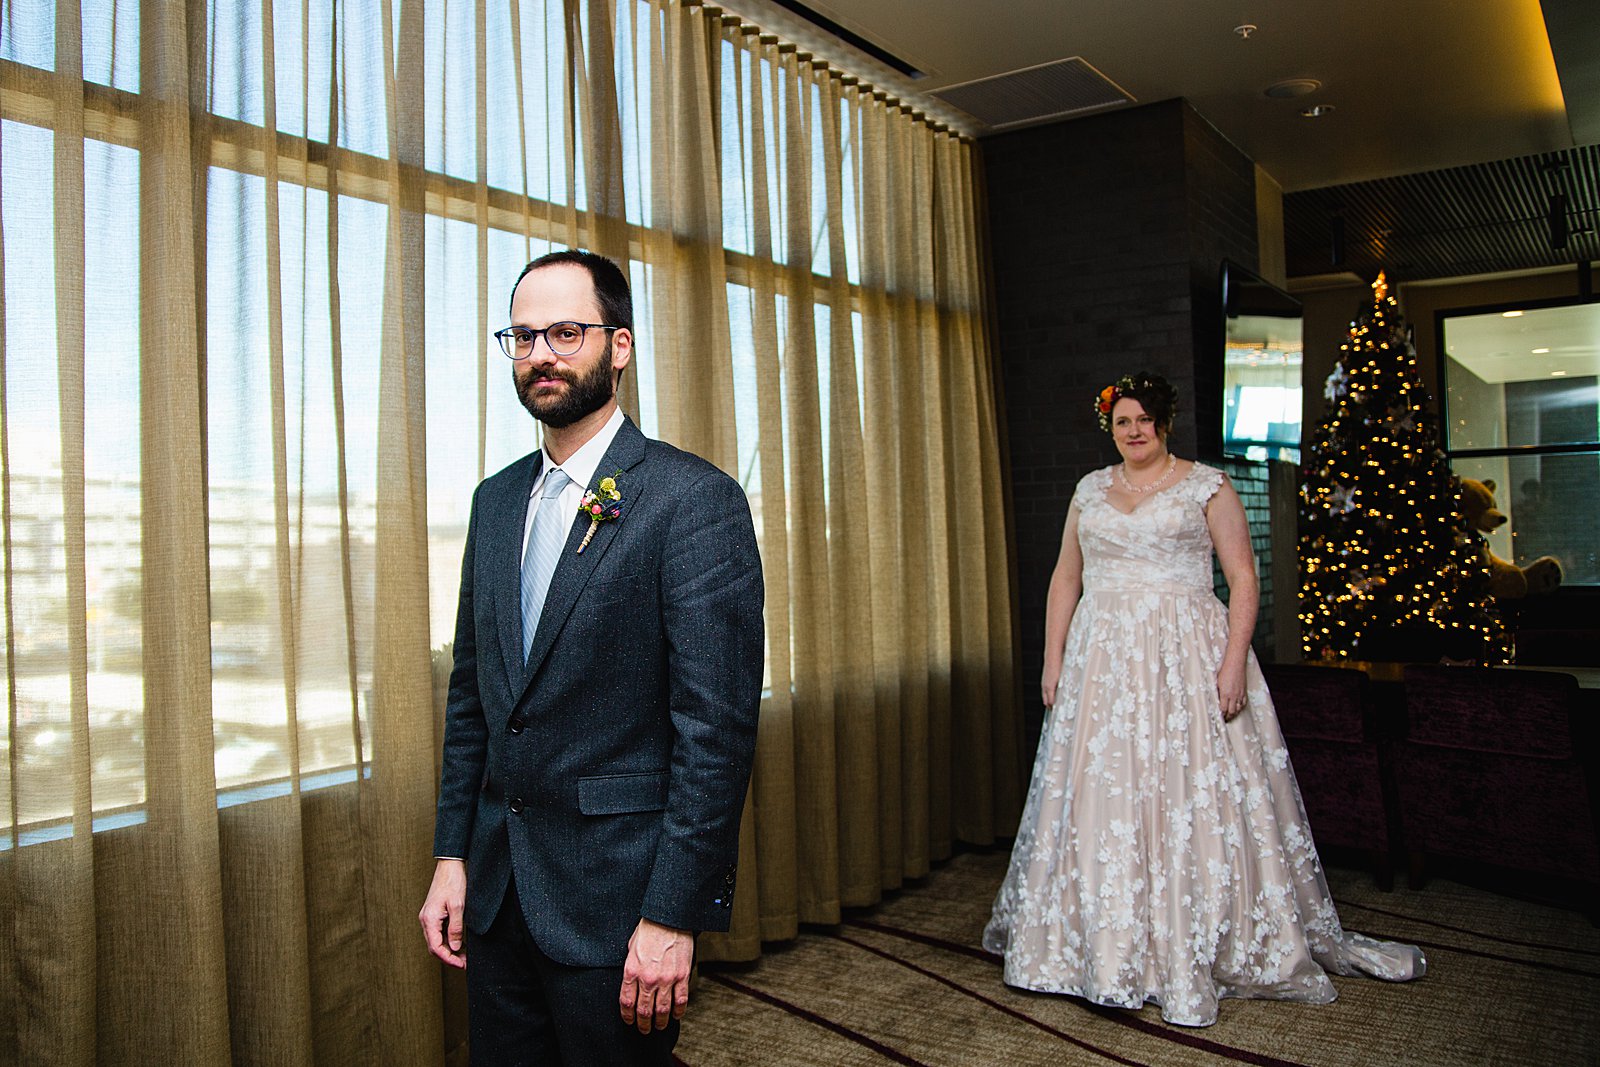 Bride and Groom's first look by Phoenix wedding photographer PMA Photography.